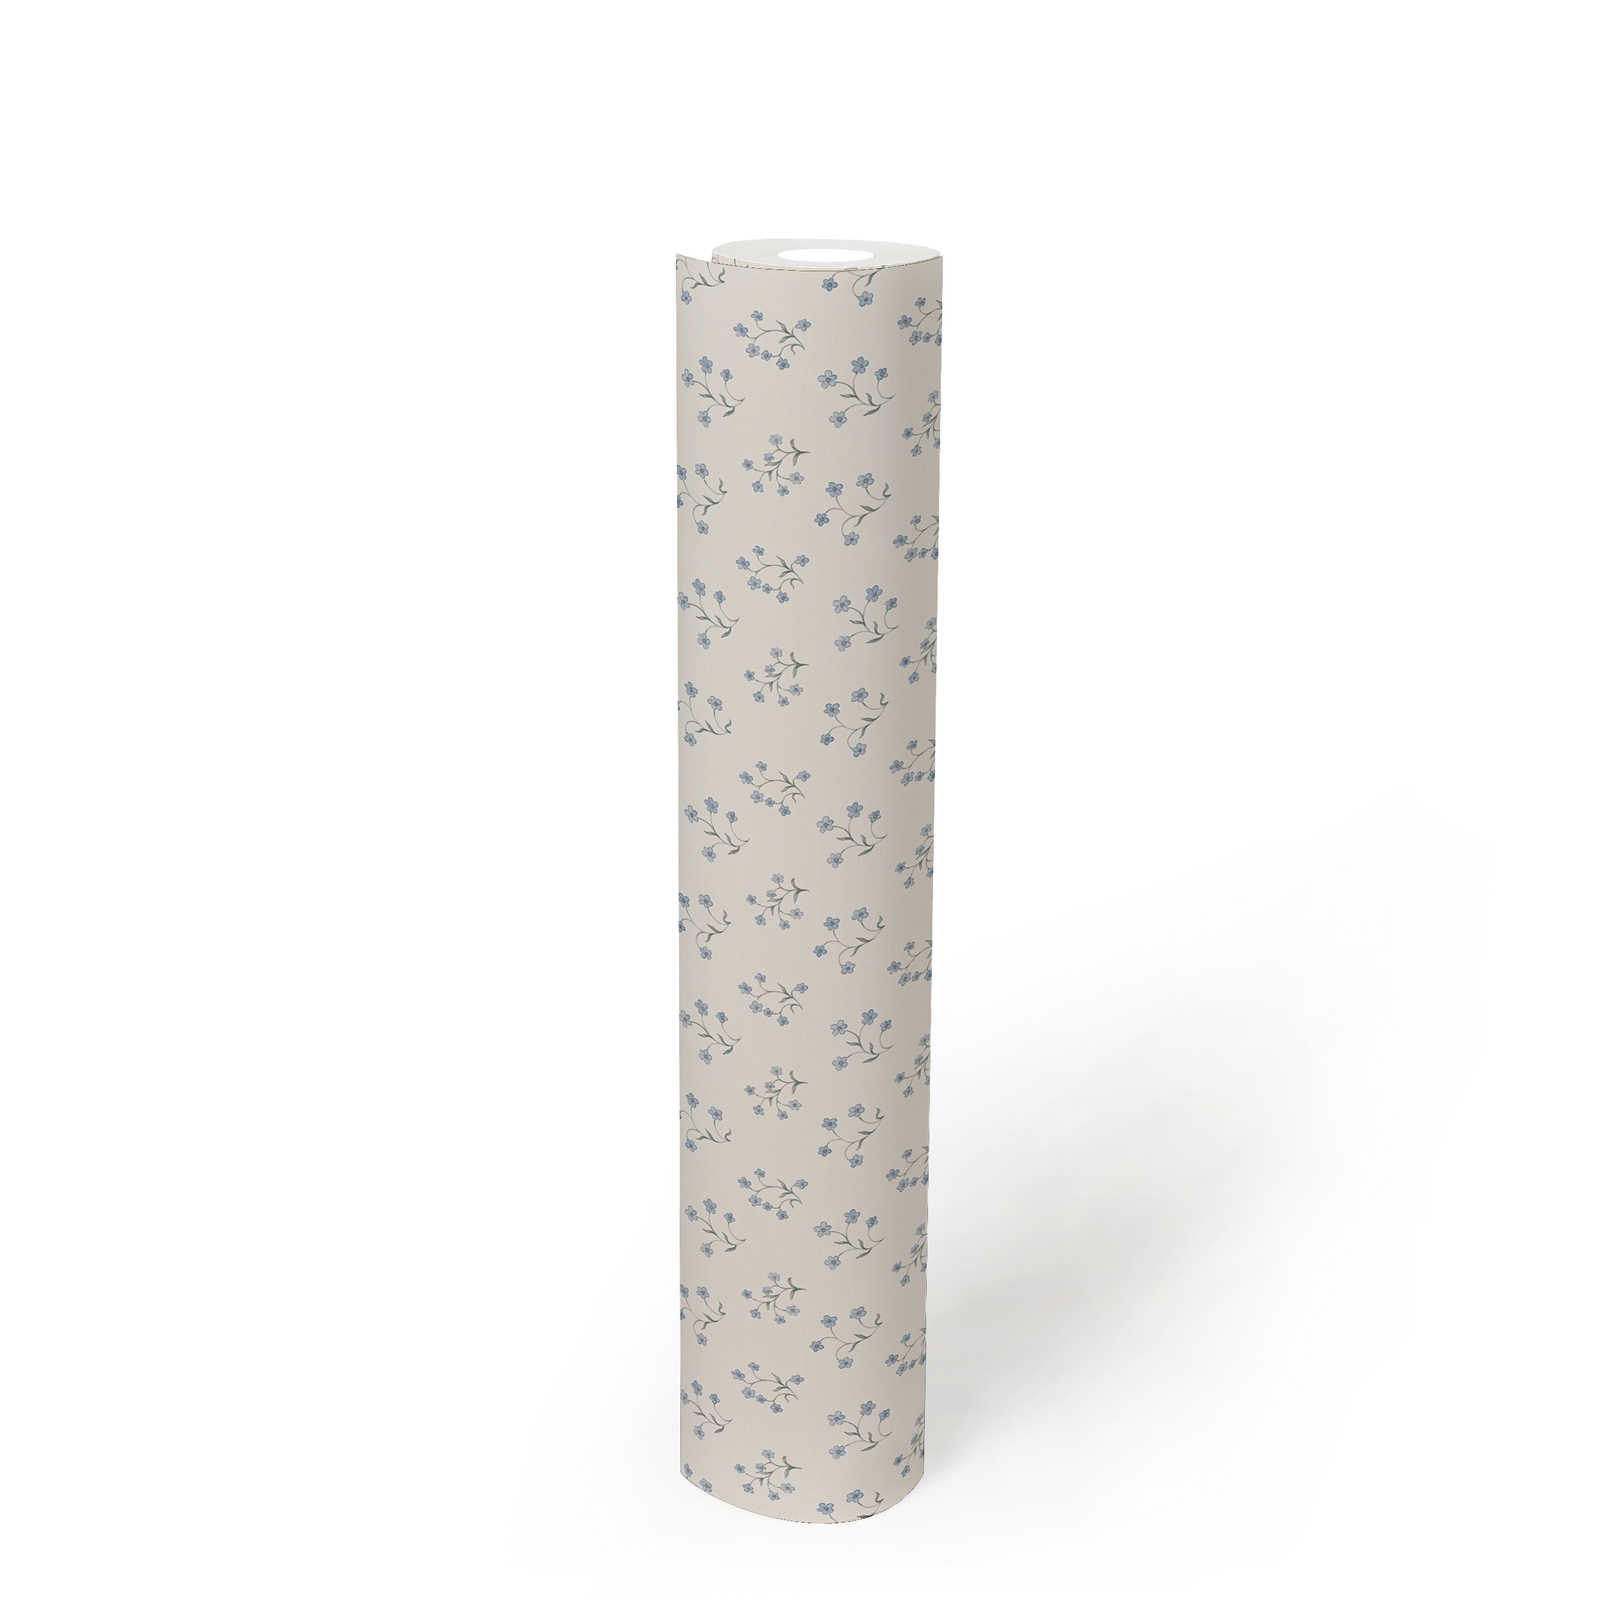             Non-woven wallpaper with fine floral pattern - white, blue, grey
        